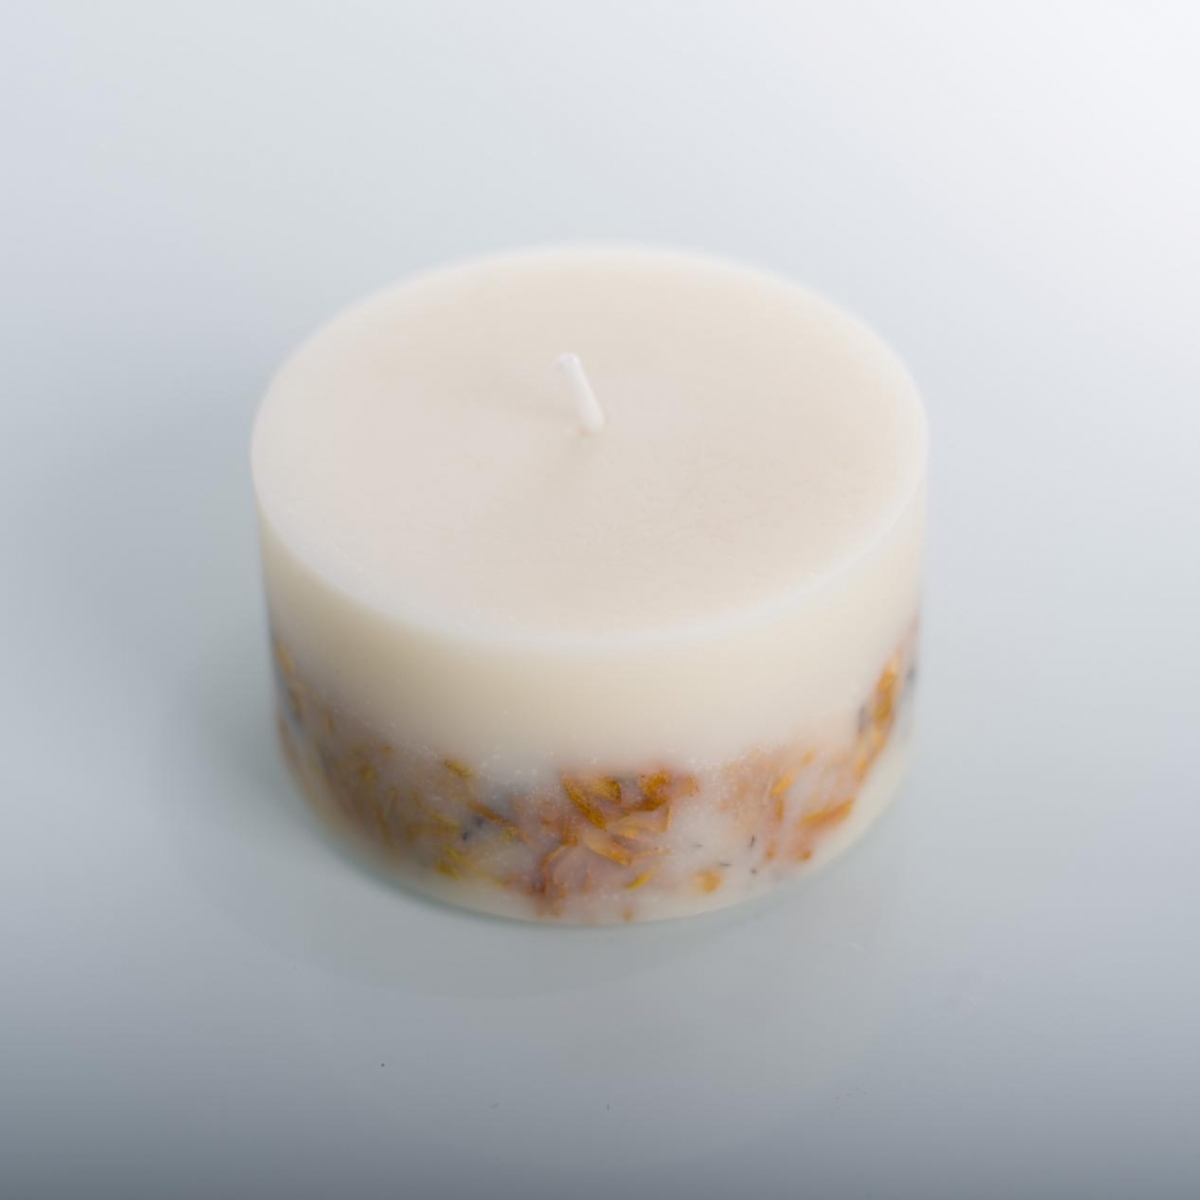 Pillar Candles：Milk White Soy Wax, Honeysuckle Dried Flowers ,Scented Candle ,China Factory ,Good Quality,Price-HOWCANDLE-Candles,Scented Candles,Aromatherapy Candles,Soy Candles,Vegan Candles,Jar Candles,Pillar Candles,Candle Gift Sets,Essential Oils,Reed Diffuser,Candle Holder,